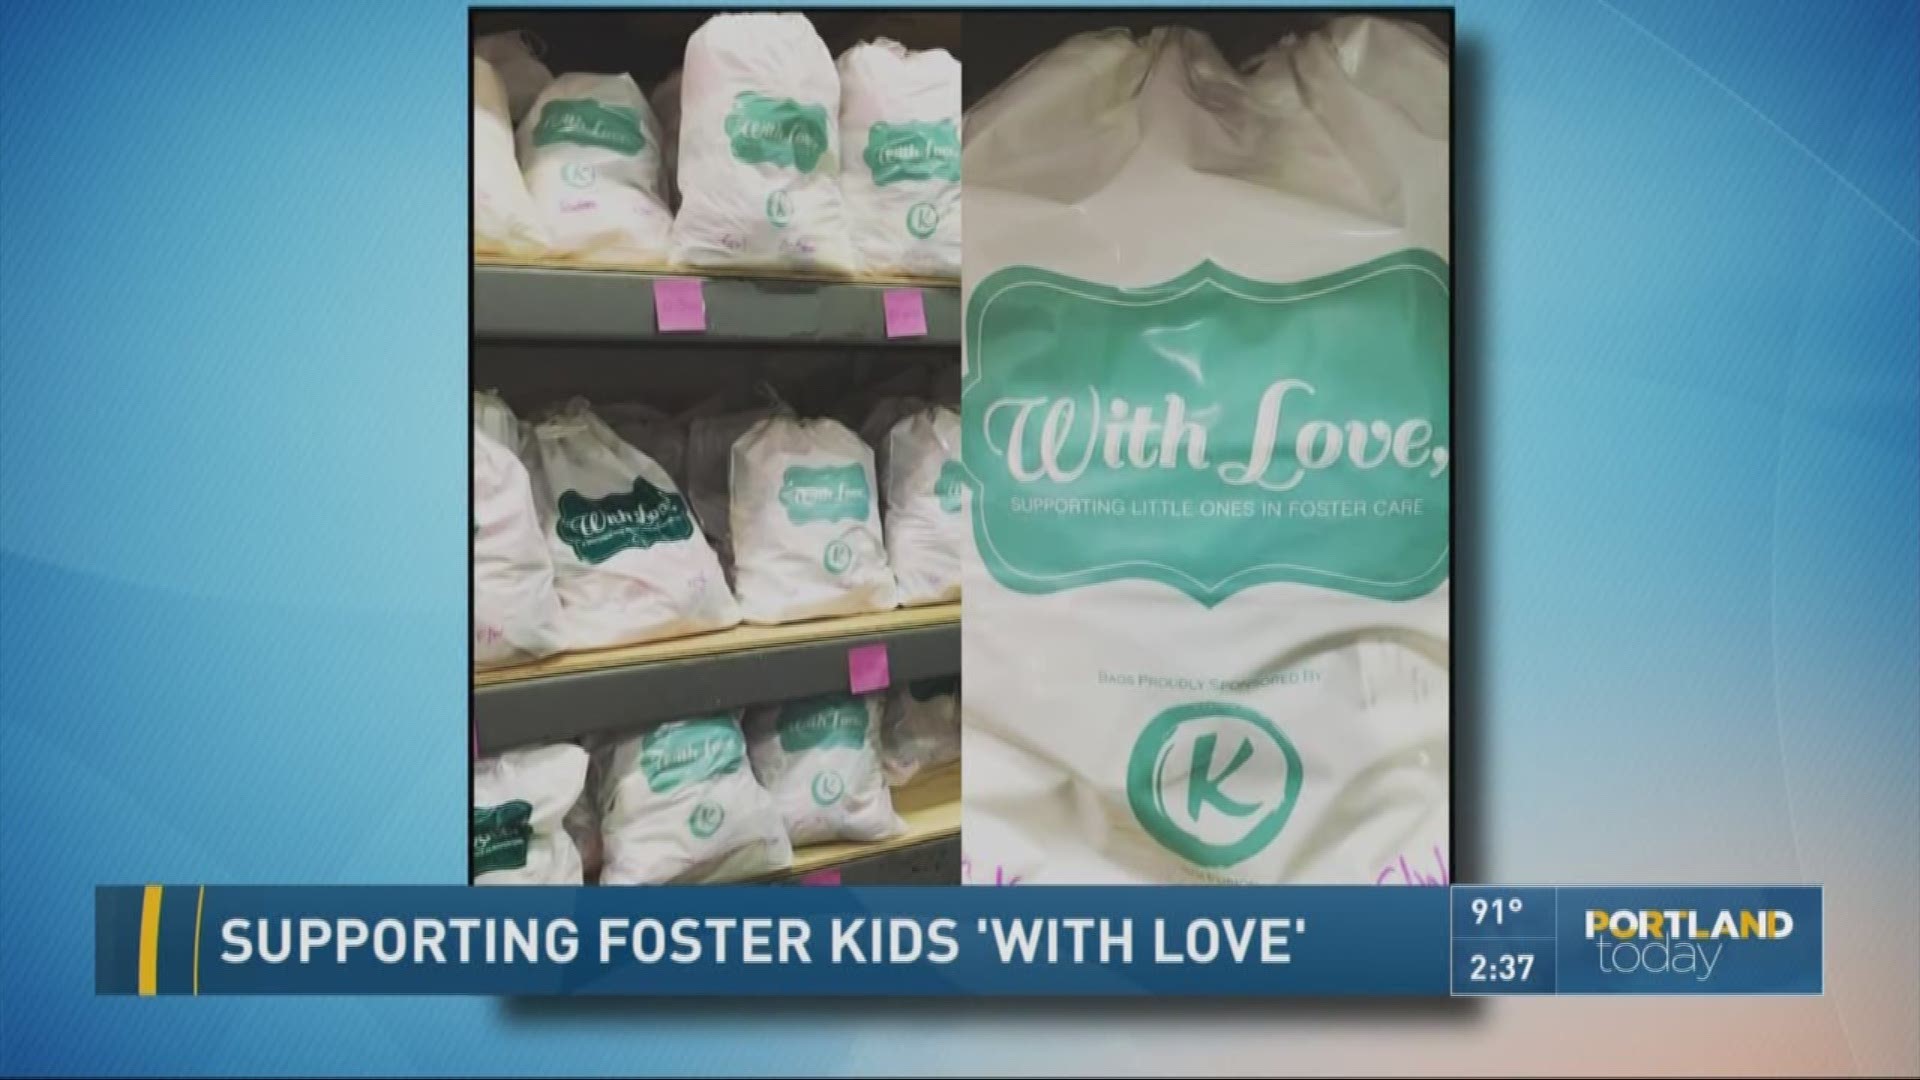 Supporting foster kids 'With Love'